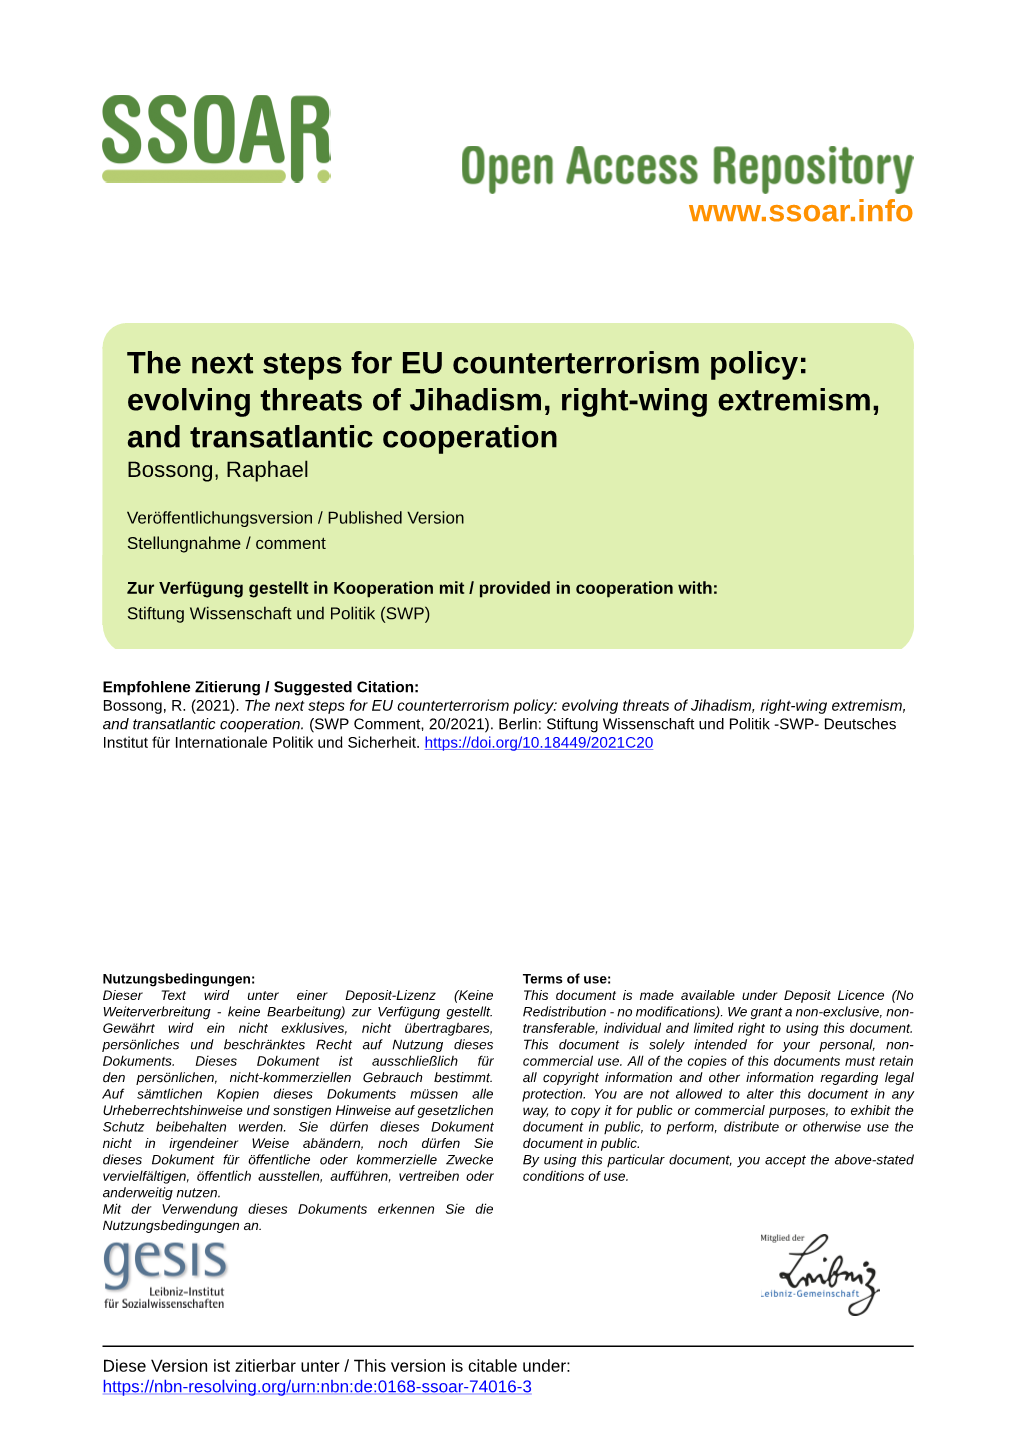 The Next Steps for EU Counterterrorism Policy: Evolving Threats of Jihadism, Right-Wing Extremism, and Transatlantic Cooperation Bossong, Raphael